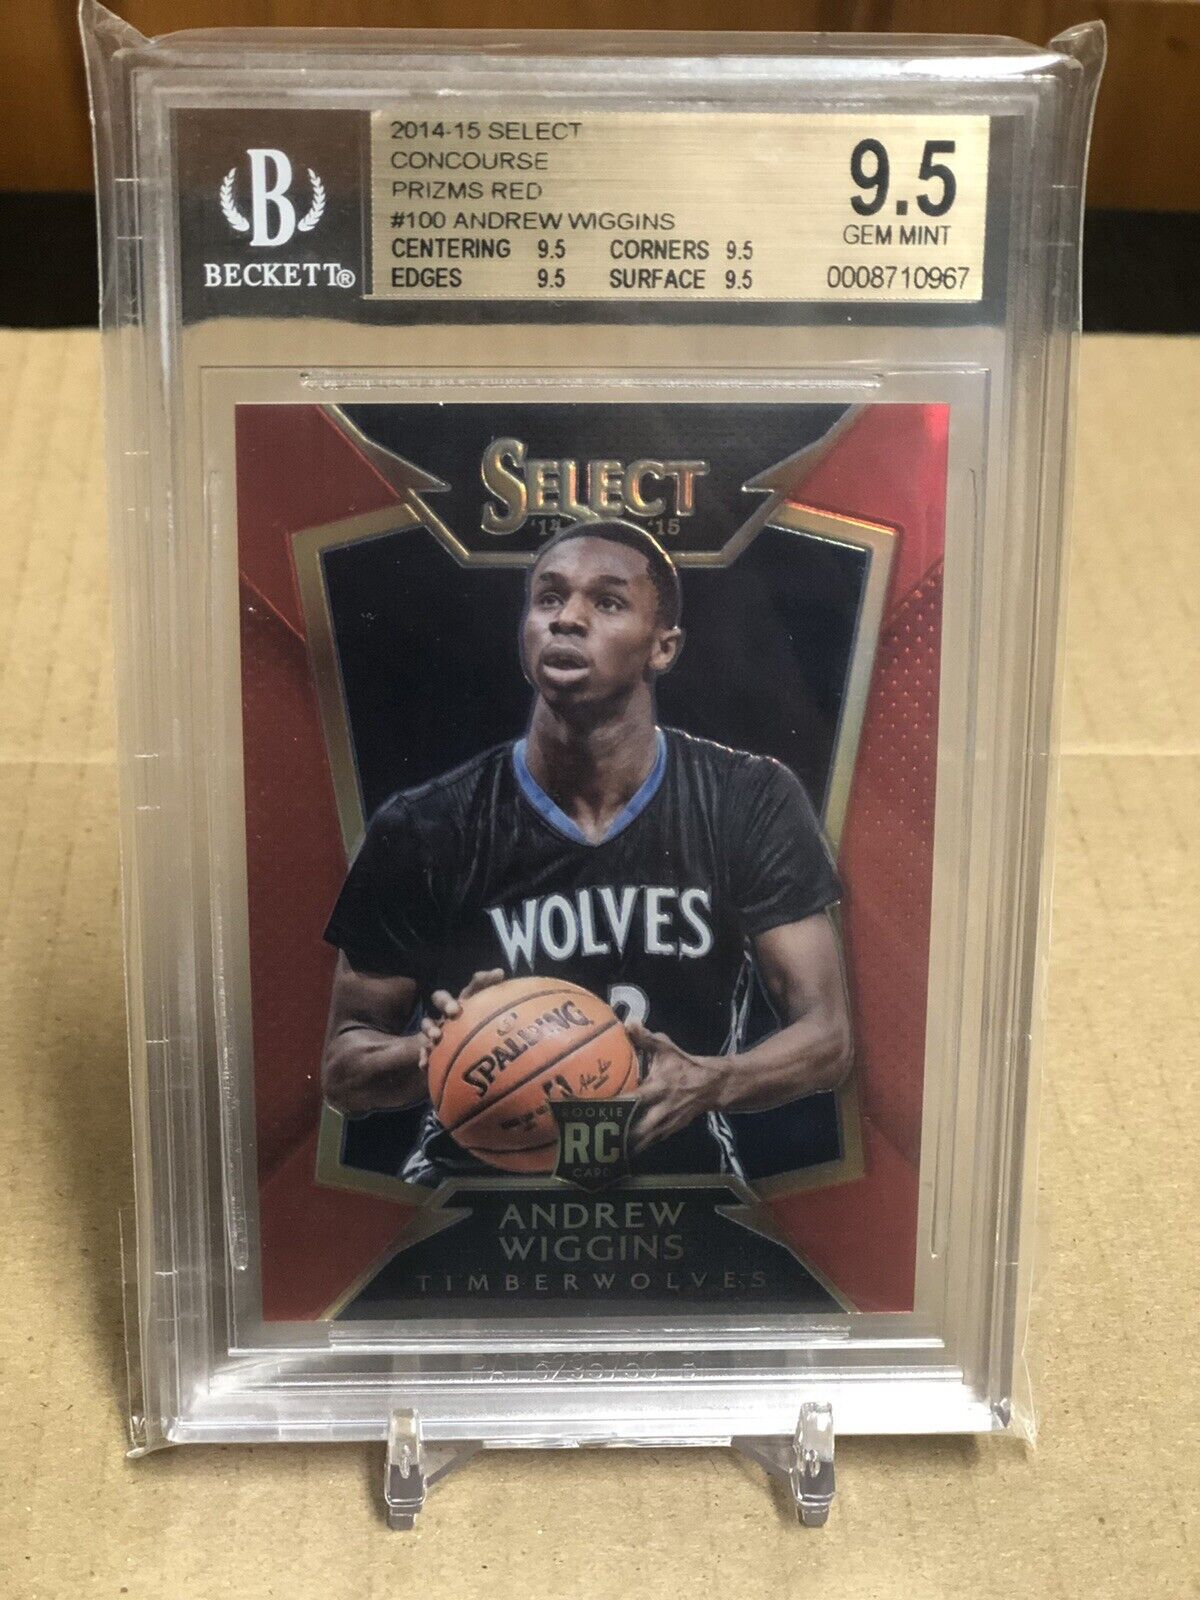 2014 Panini Select Red Prizm #100 - Andrew Wiggins Rookie RC BGS 9.5  /149 GSW